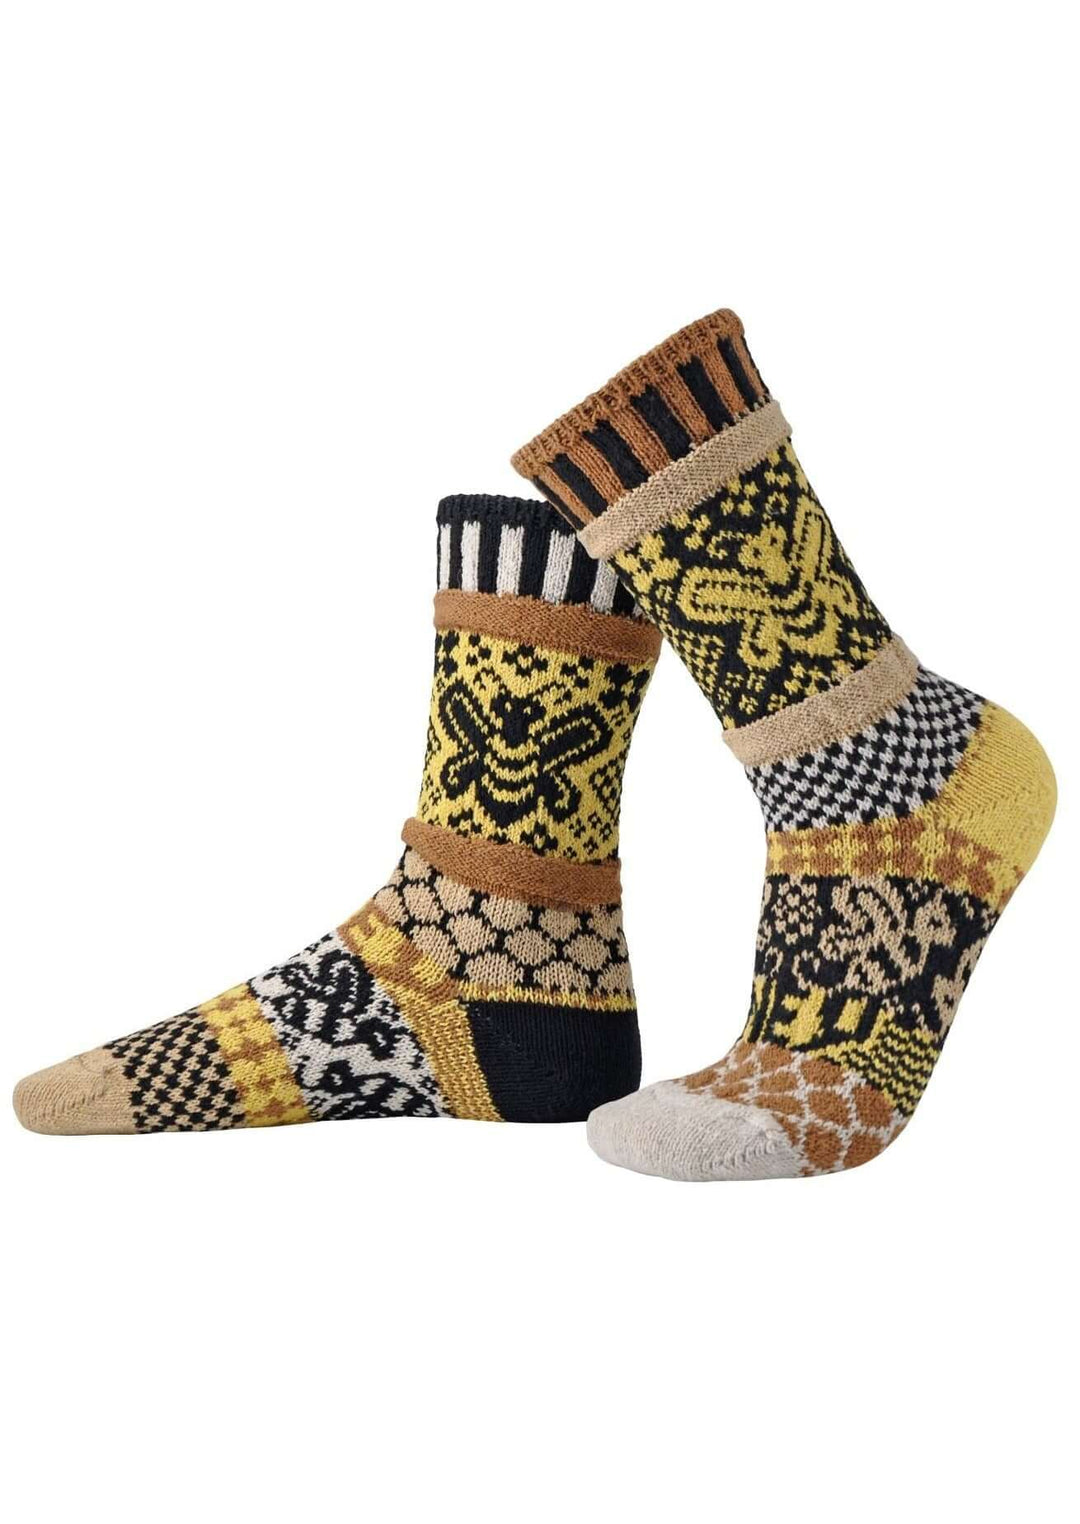 Solmate Socks HONEY BEE Knitted Crew Socks Proudly Made USA | These socks are delightfully mismatched & so very comfortable. American Made Clothing